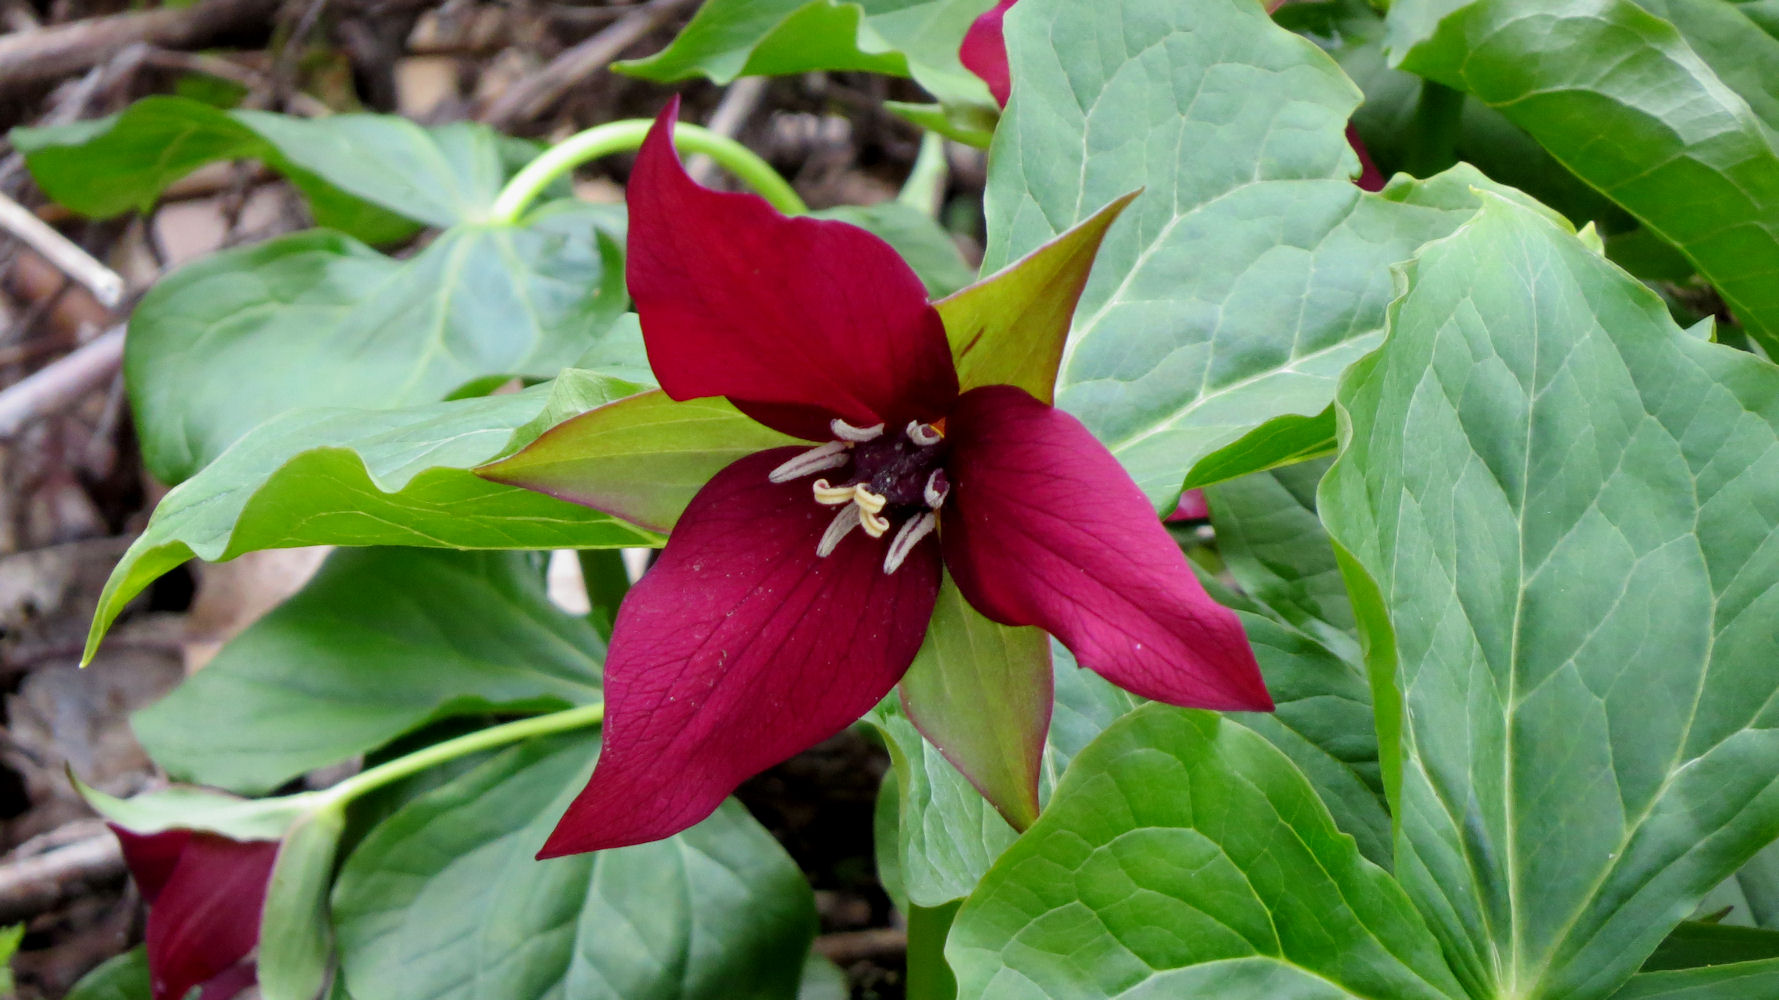 Flower has three pointed green bracts, with three offset red petals that look like flower petals. Centre has white antennae-like stamens.